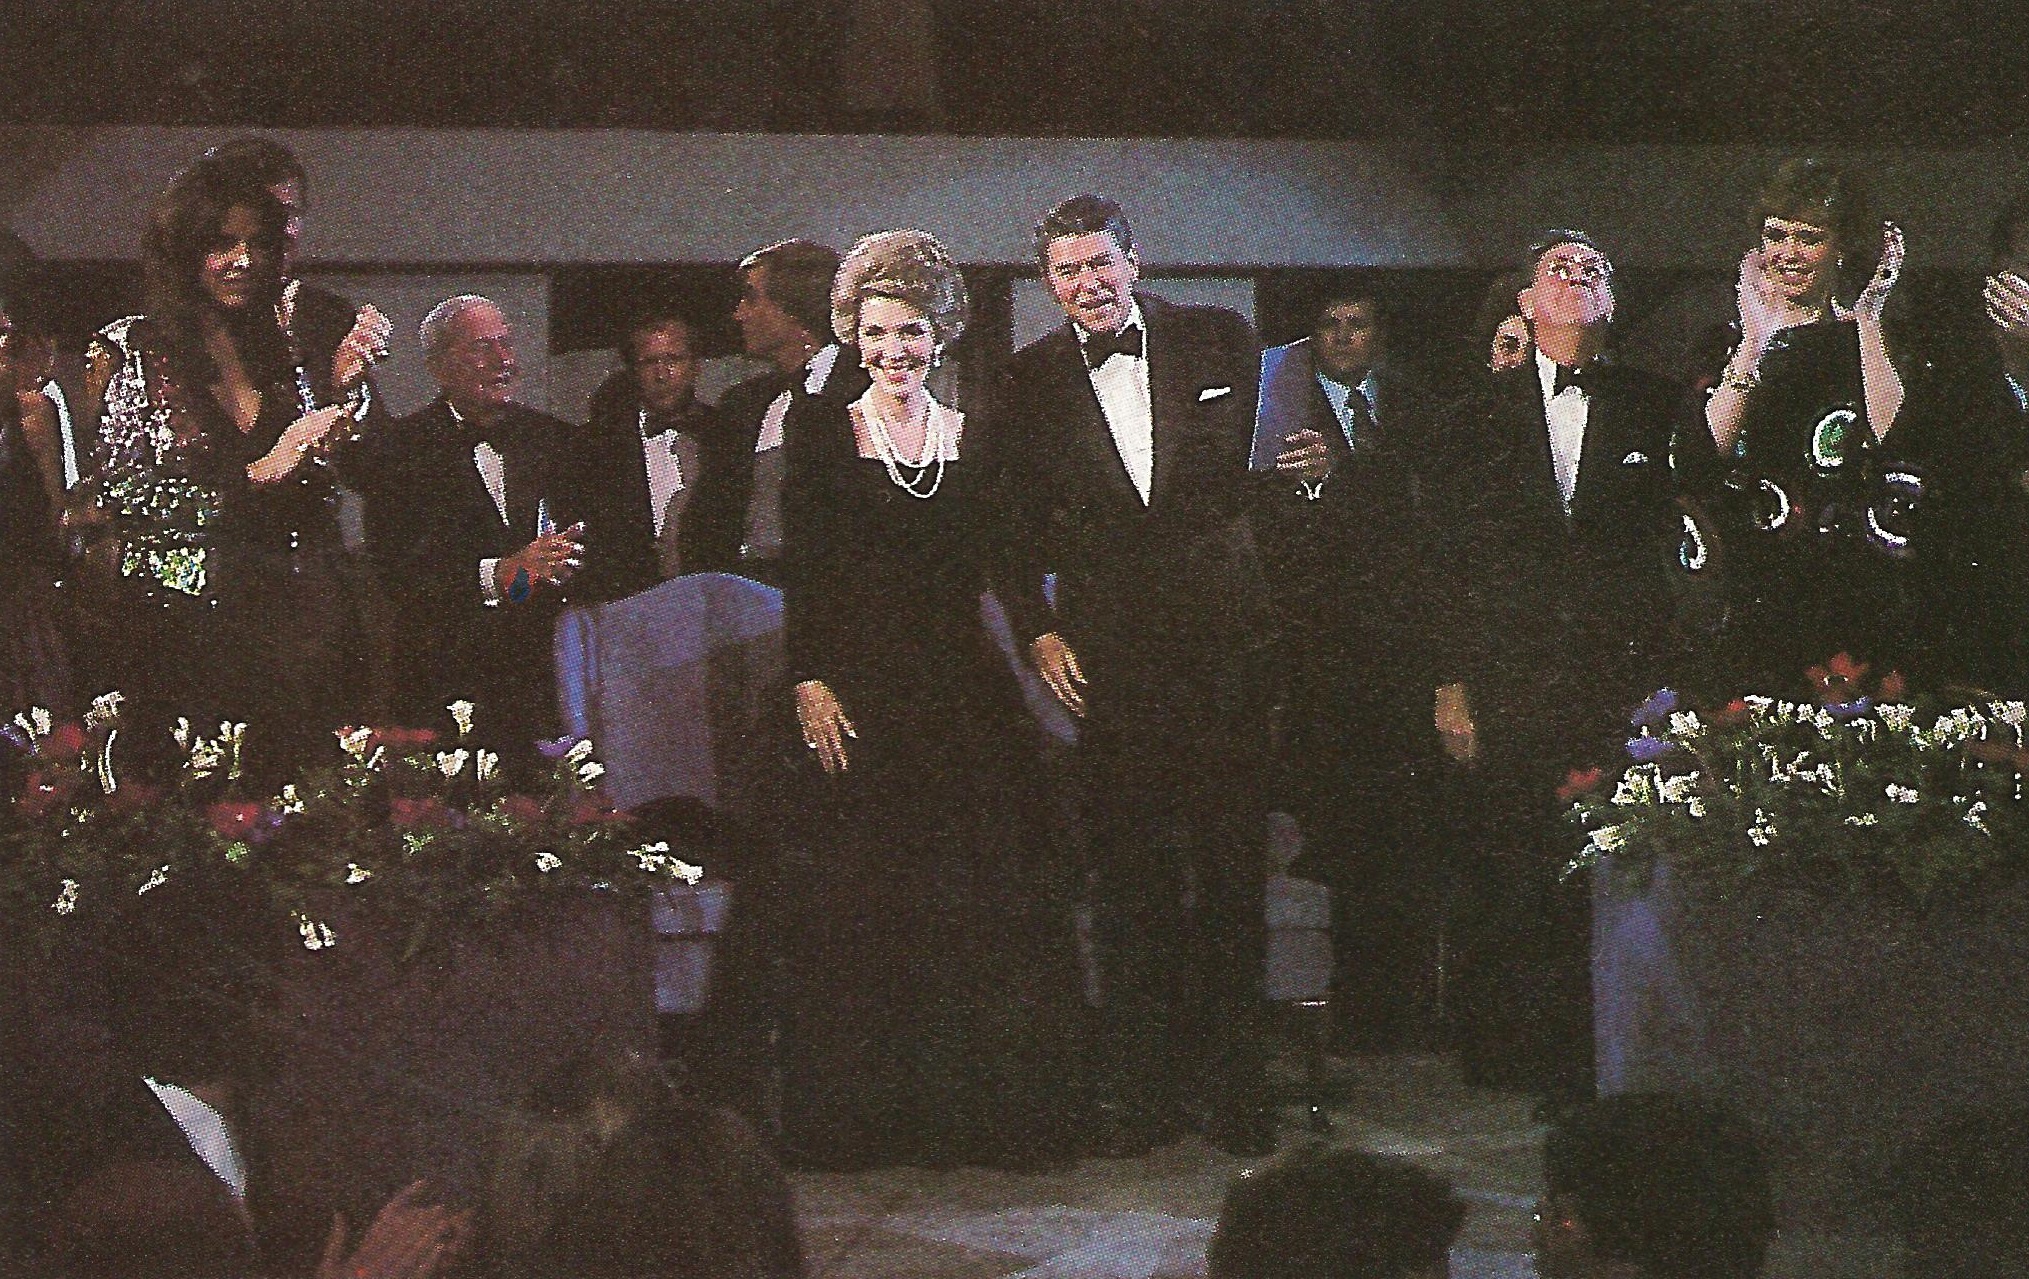 The Reagans acknowledge the applause for them at the 1981 Gala.